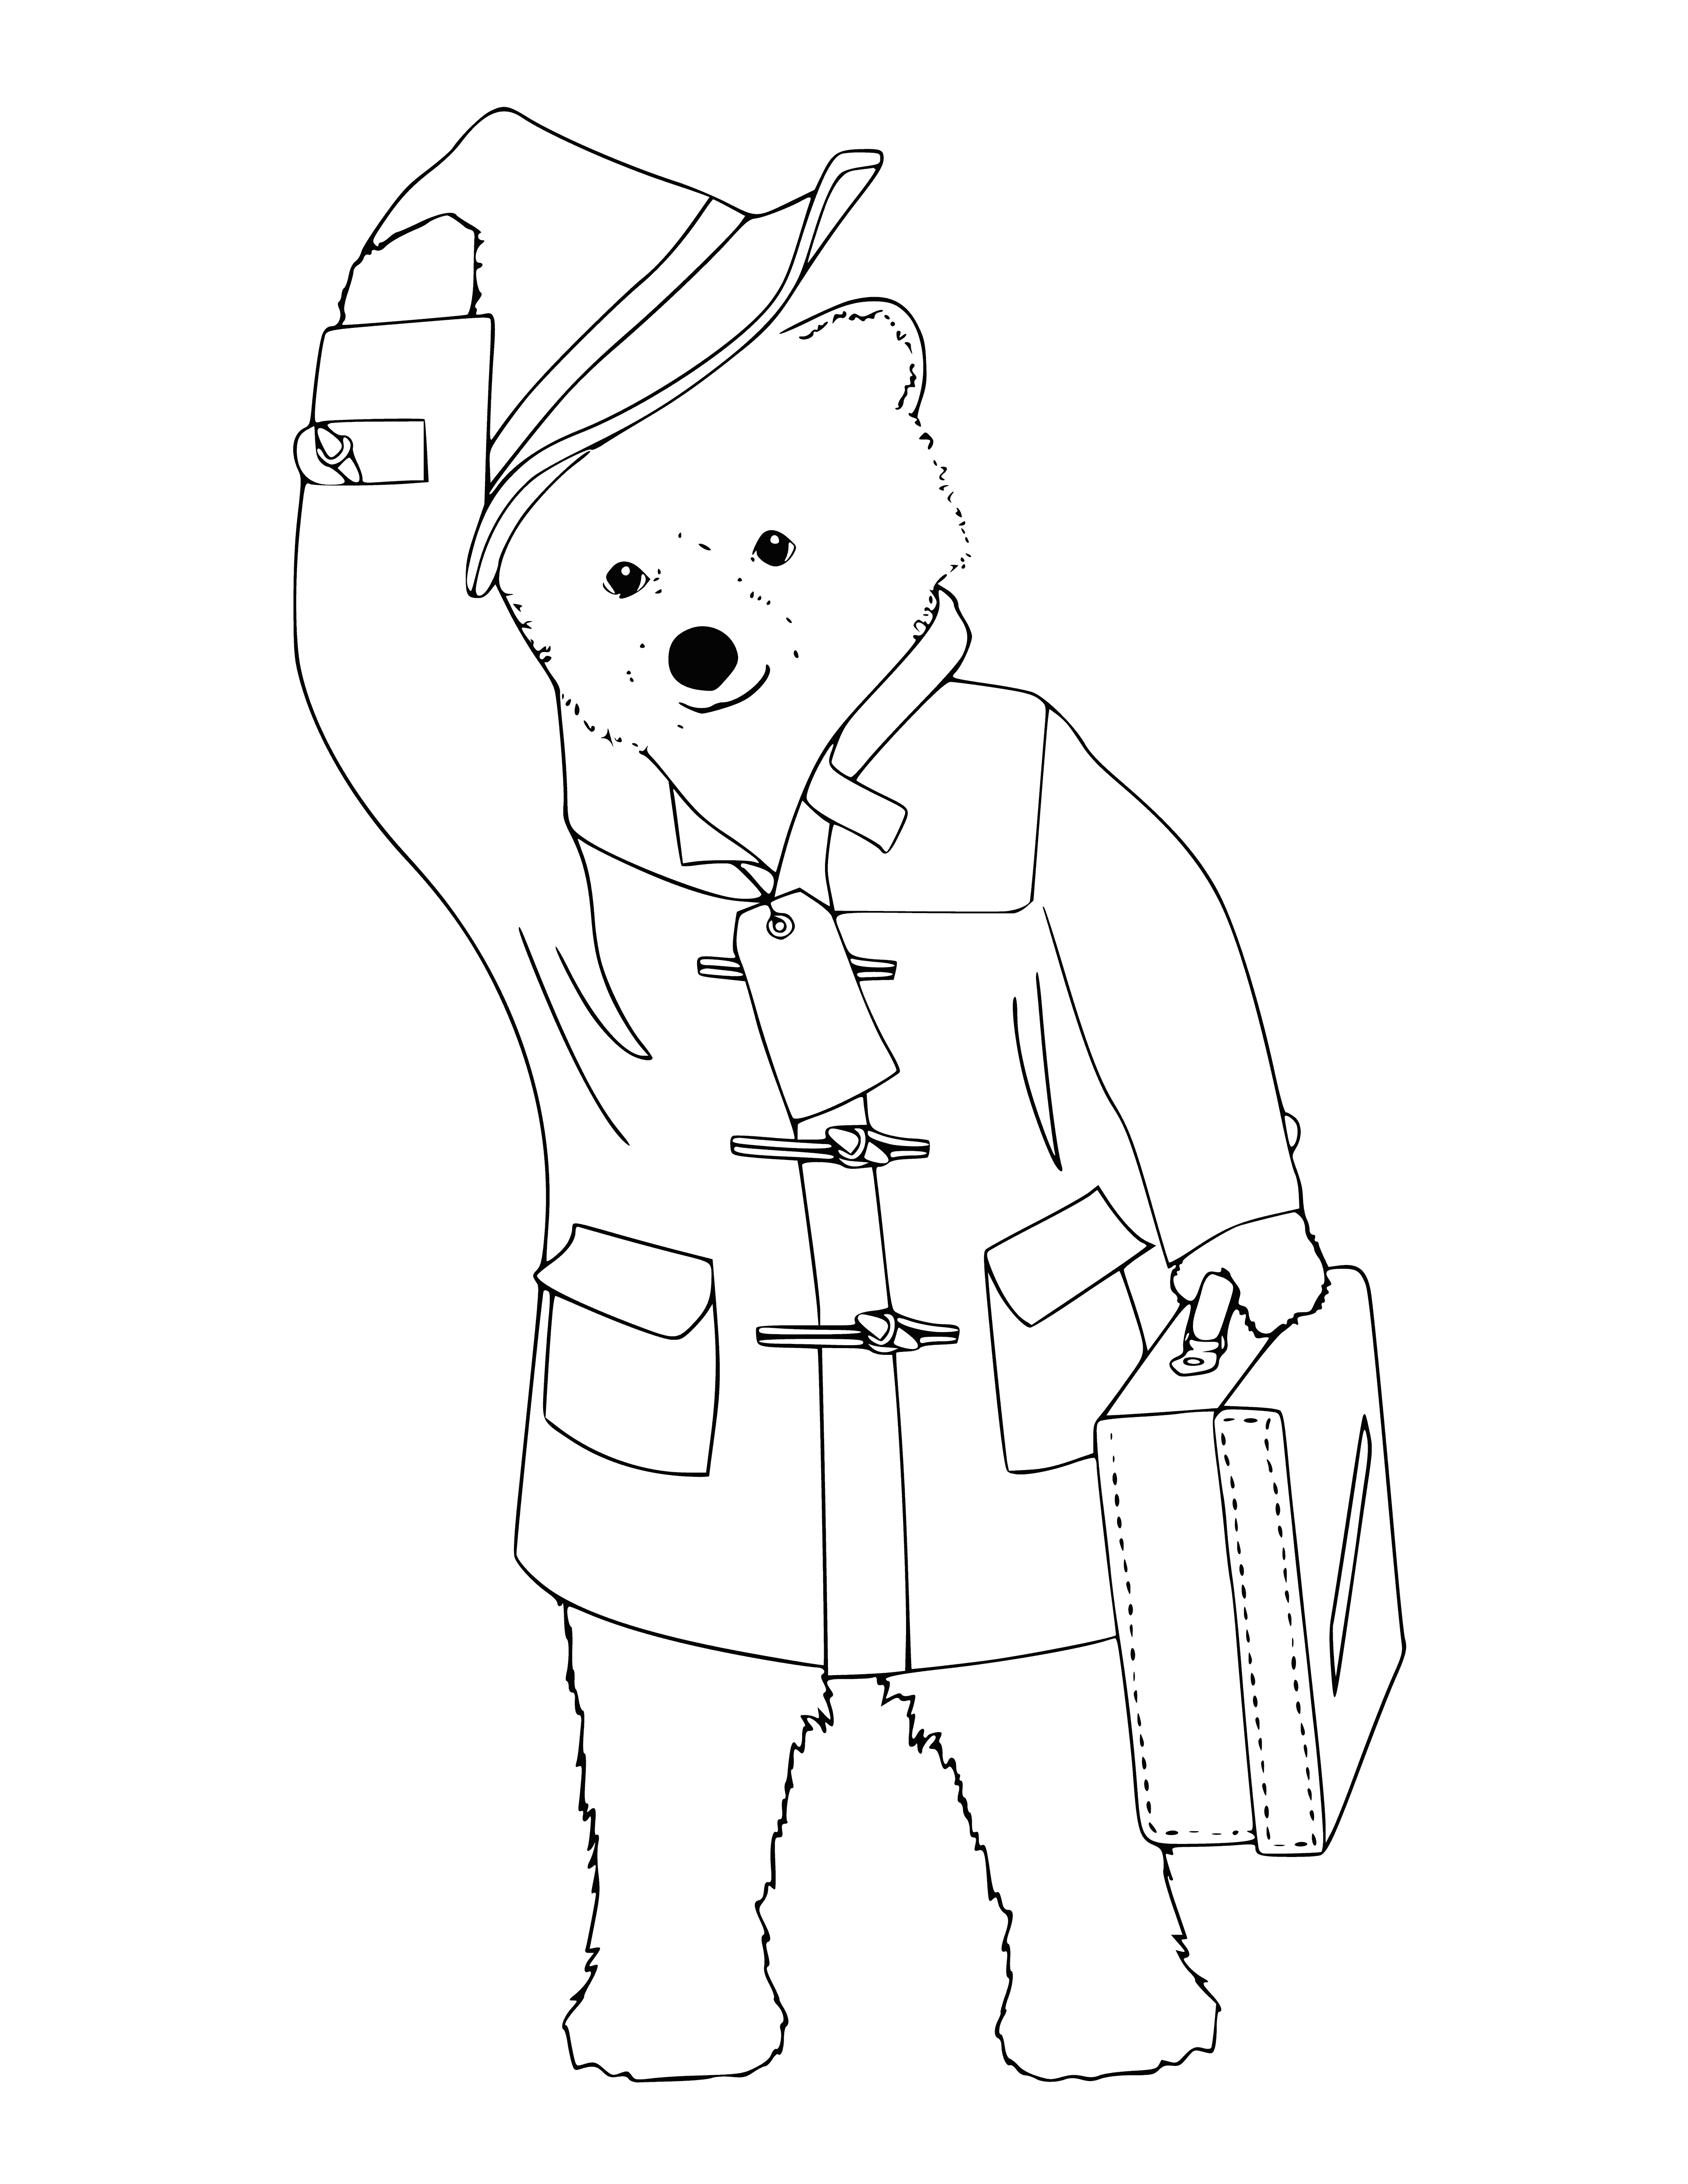 Paddington bear with a suitcase coloring page